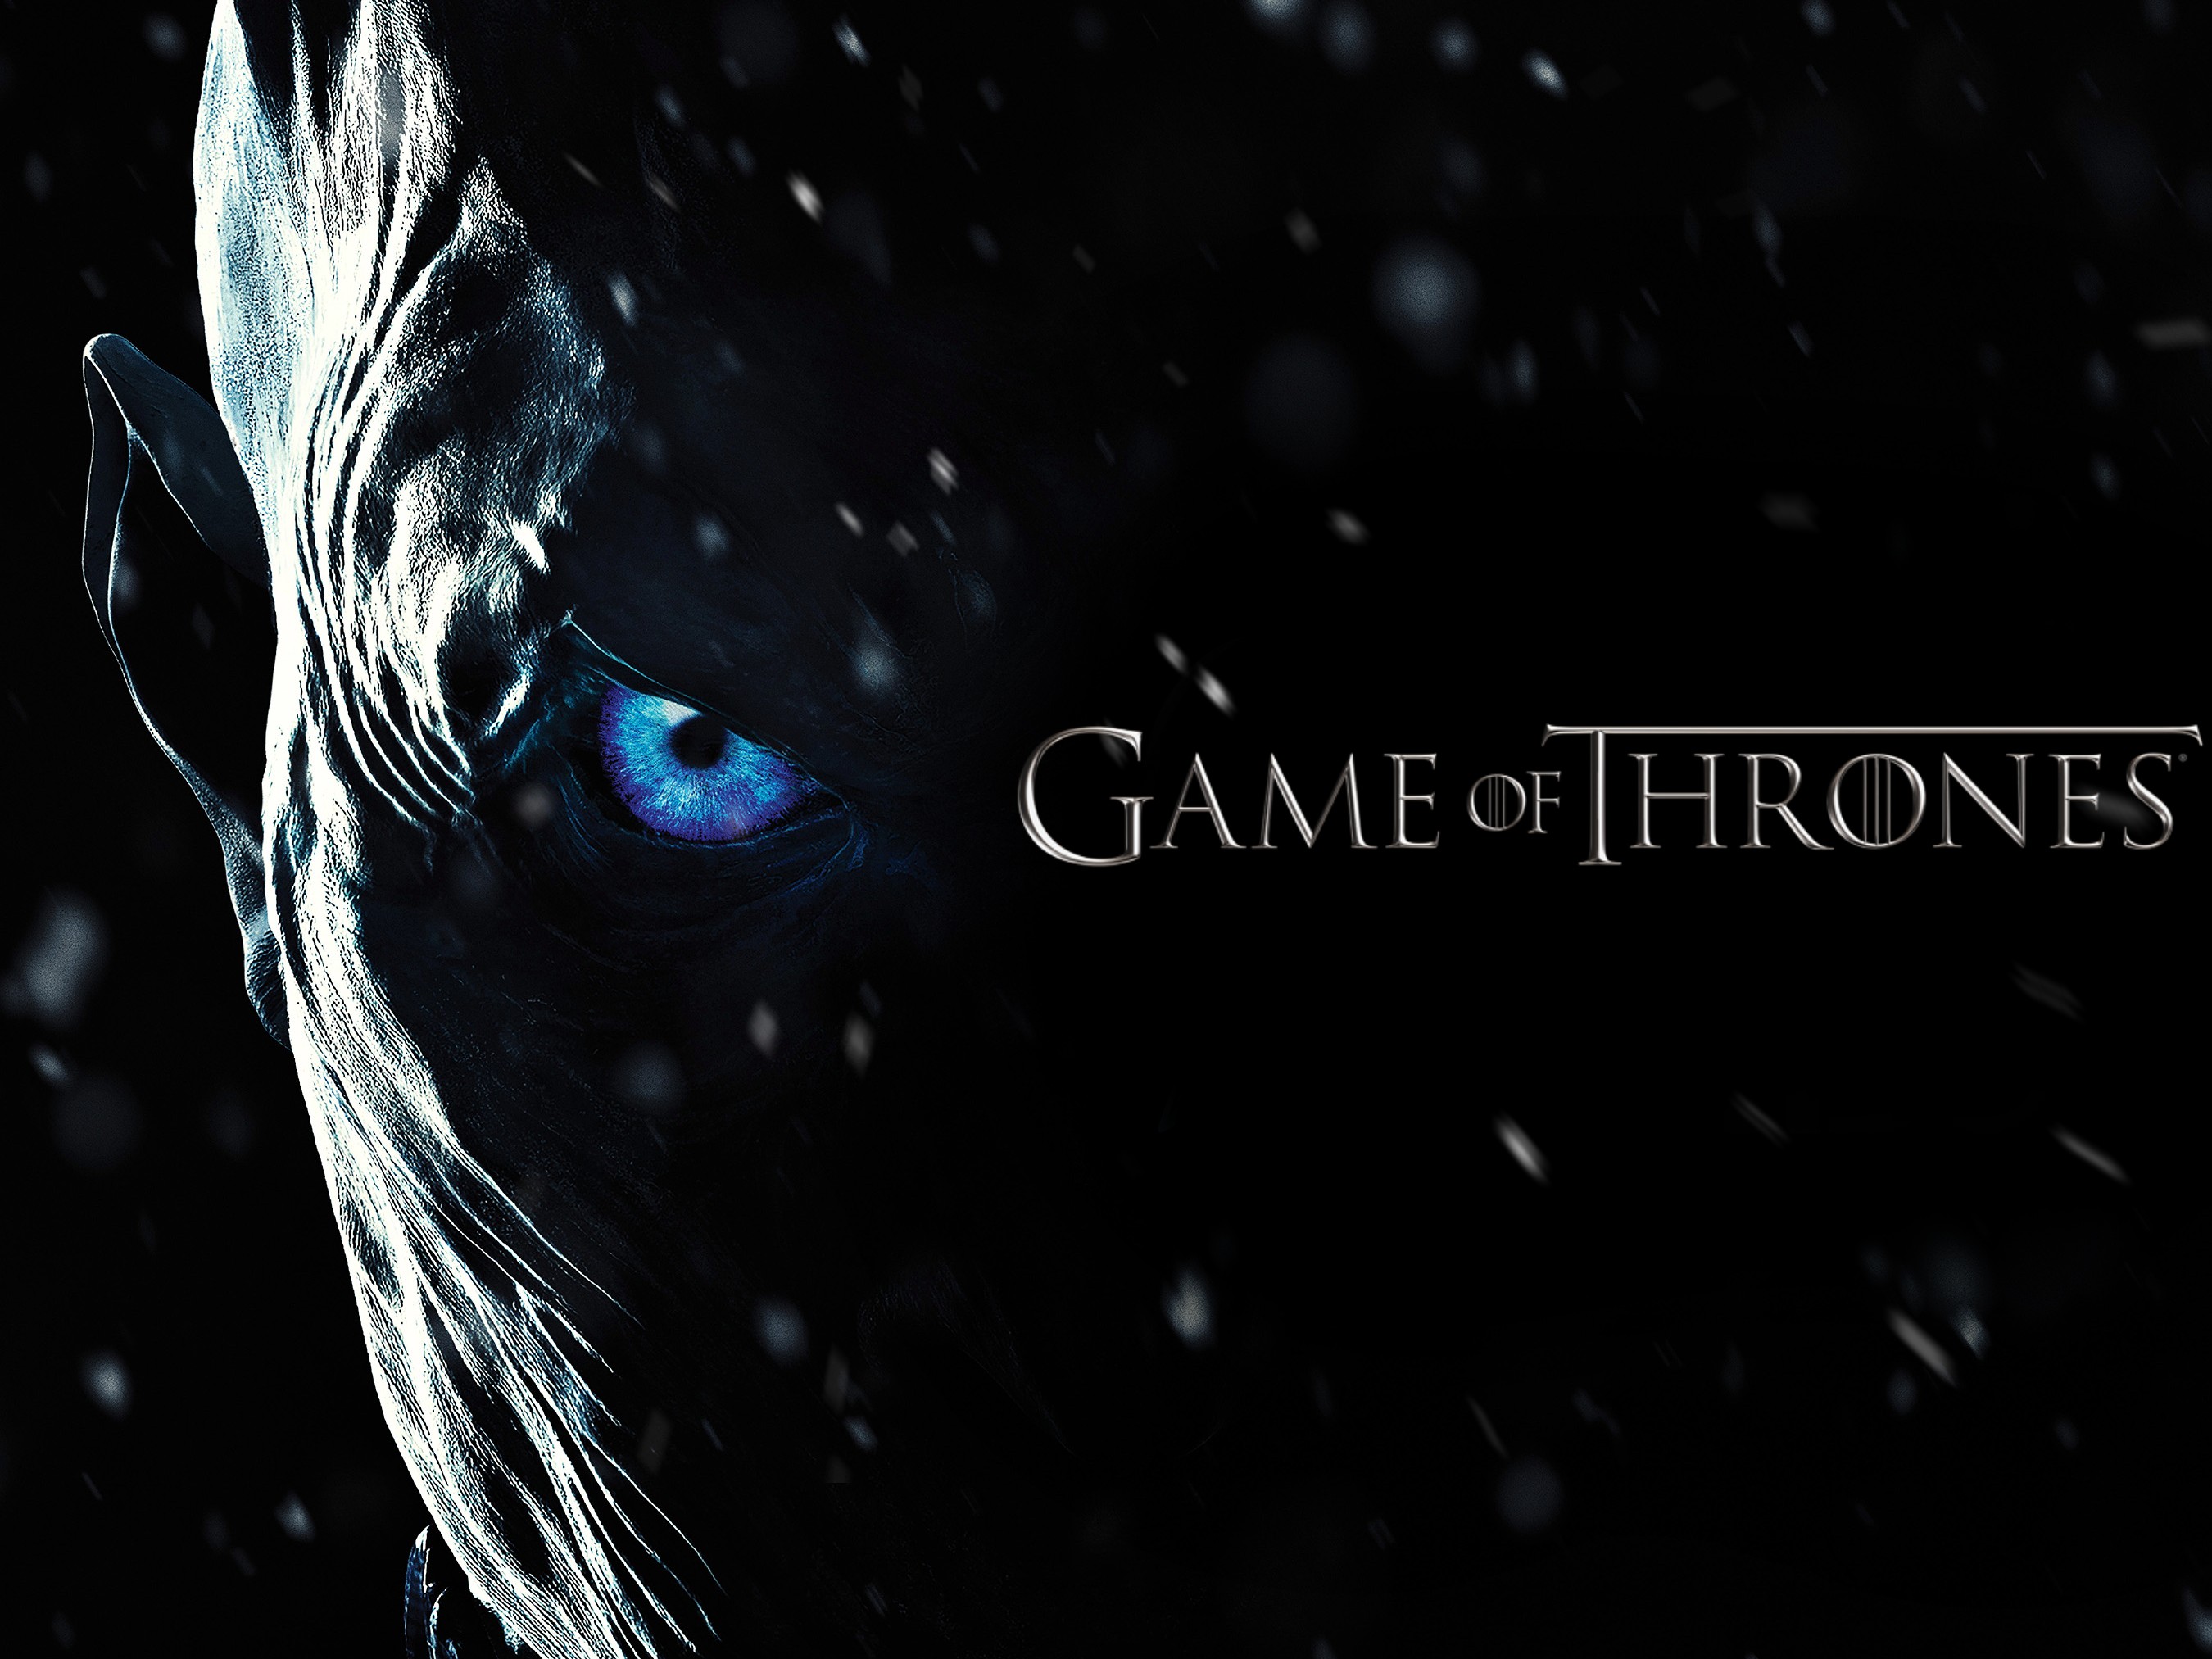 blue eyes, The Night King, Game of Thrones Wallpaper